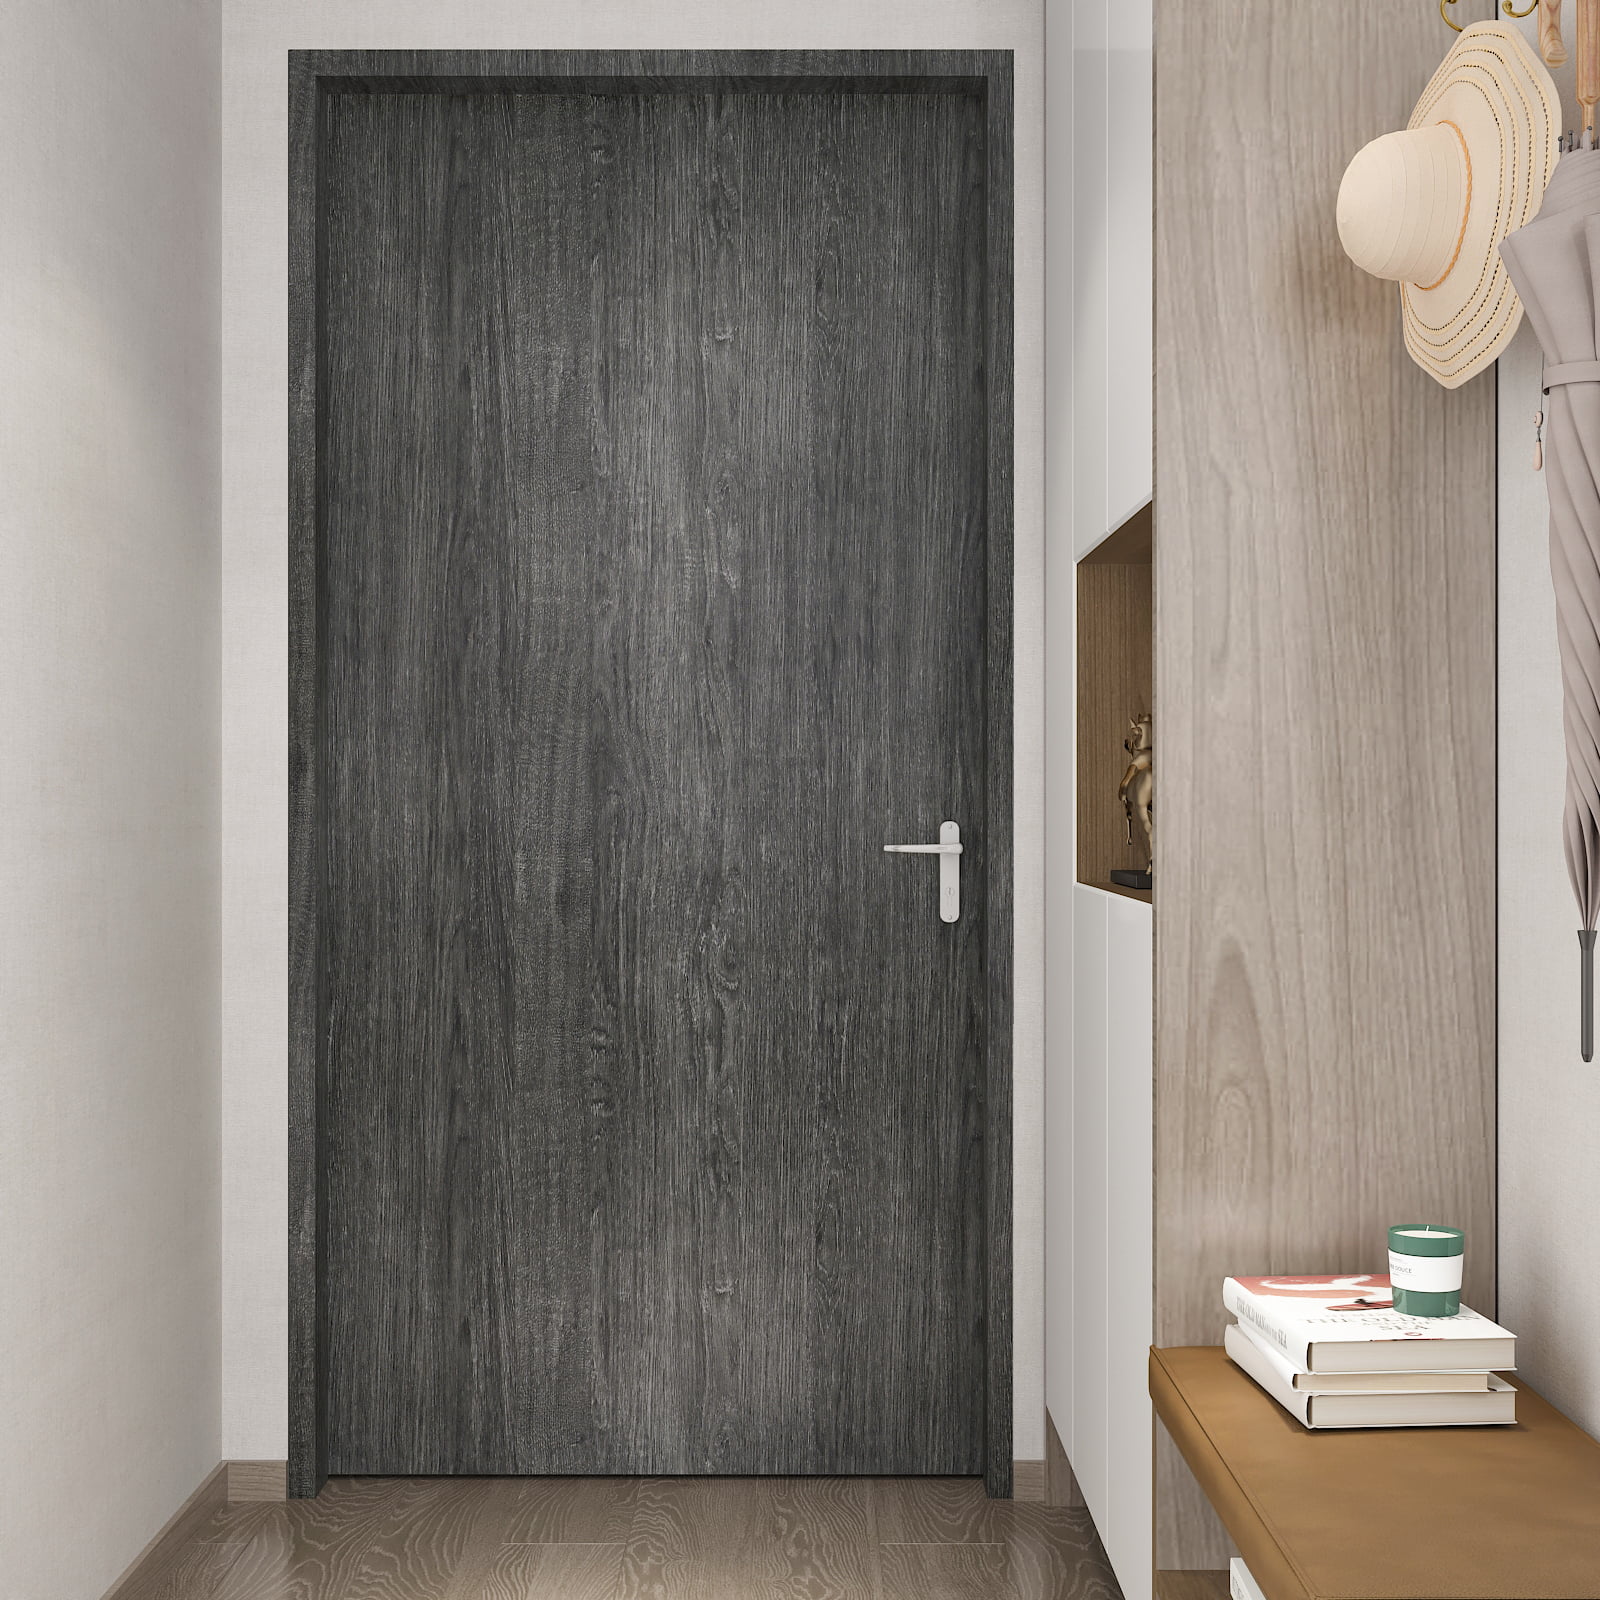 Hatoku 17.7 x 355 Grey Wood Contact Paper Wallpaper, PVC Self Adhesive Peel and Stick Wall Paper, Easy to Clean Decorative Wall Covering